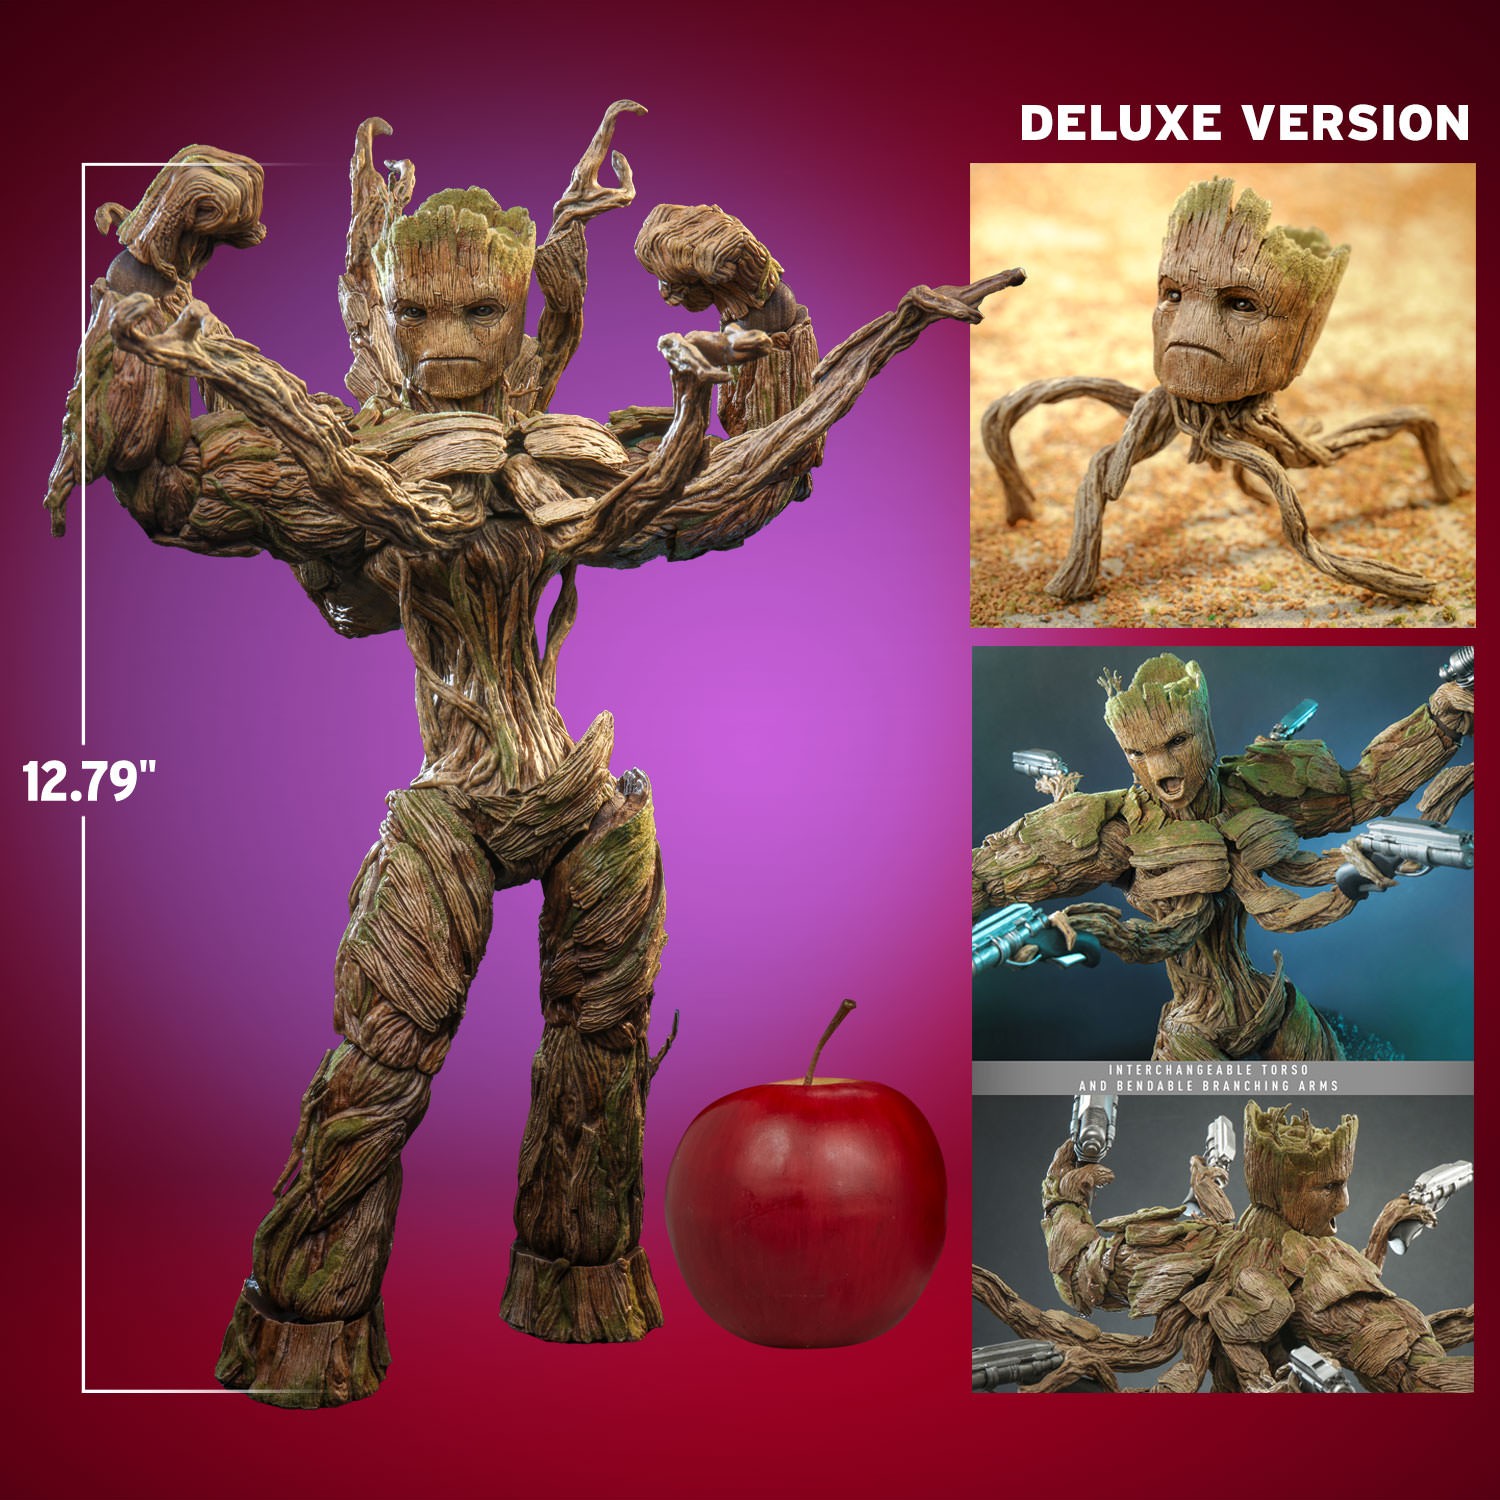 Groot Sixth Scale Figure by Hot Toys